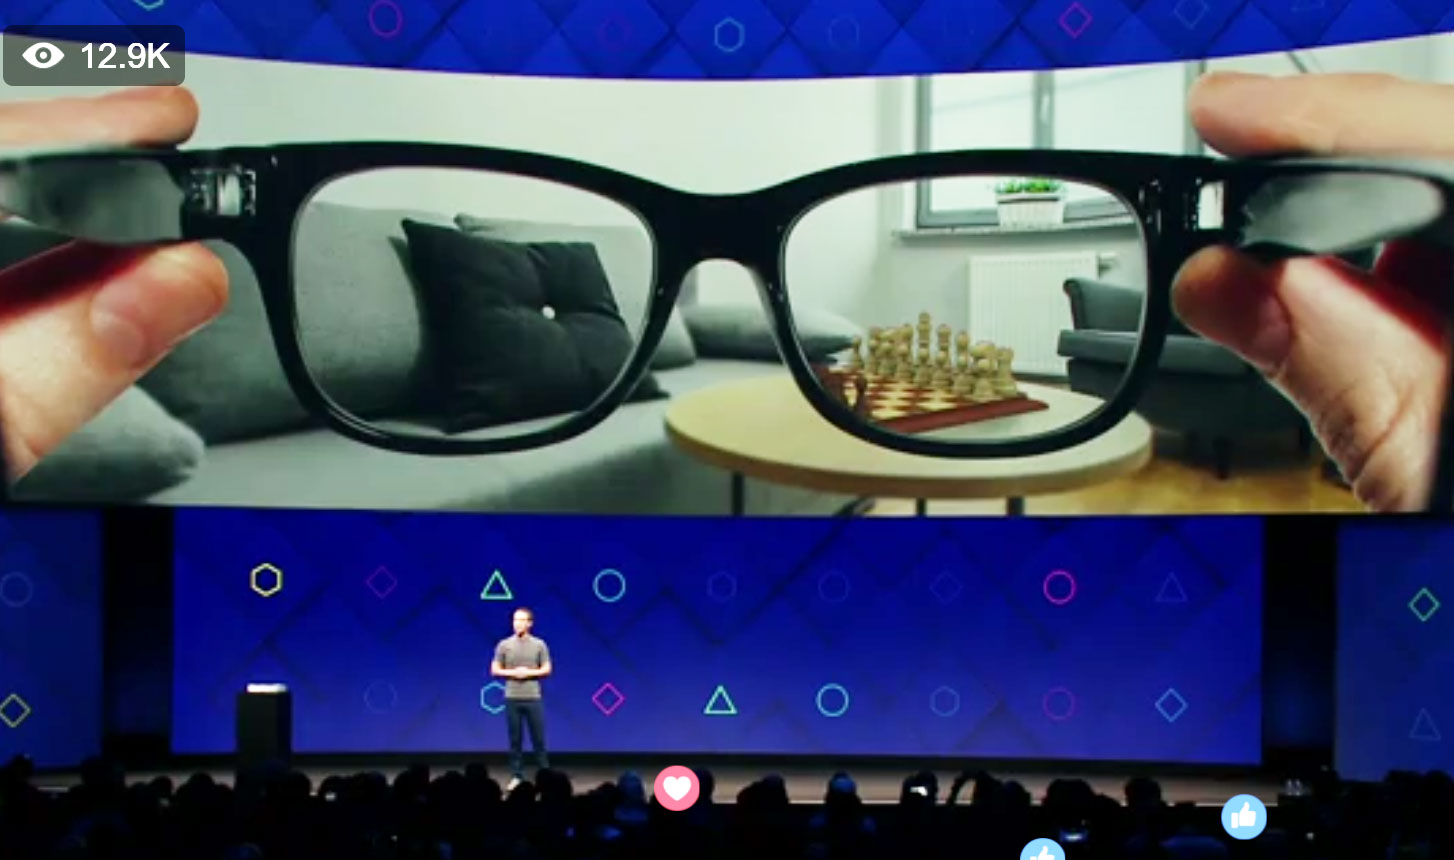 Eventually, we'll use glasses for AR. That'll let us play a game of chess with a distant friend using a seemingly real chessboard.